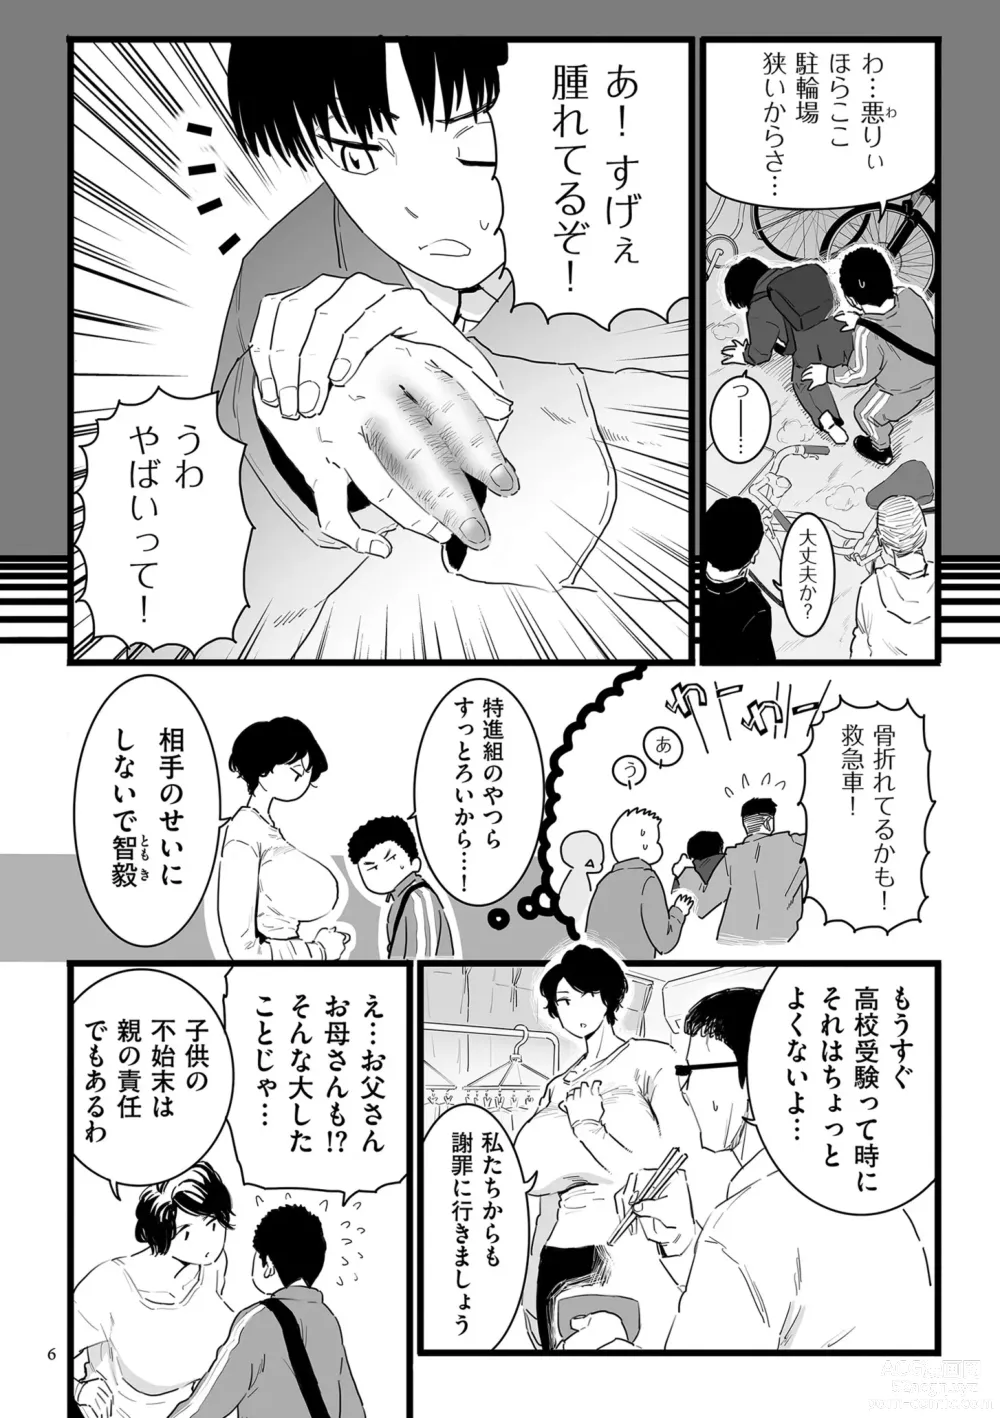 Page 6 of manga Mesu Dorei Sengen - A chain of nightmares, Six heroines become ME DOREI in front of a big, strong cxxk...?